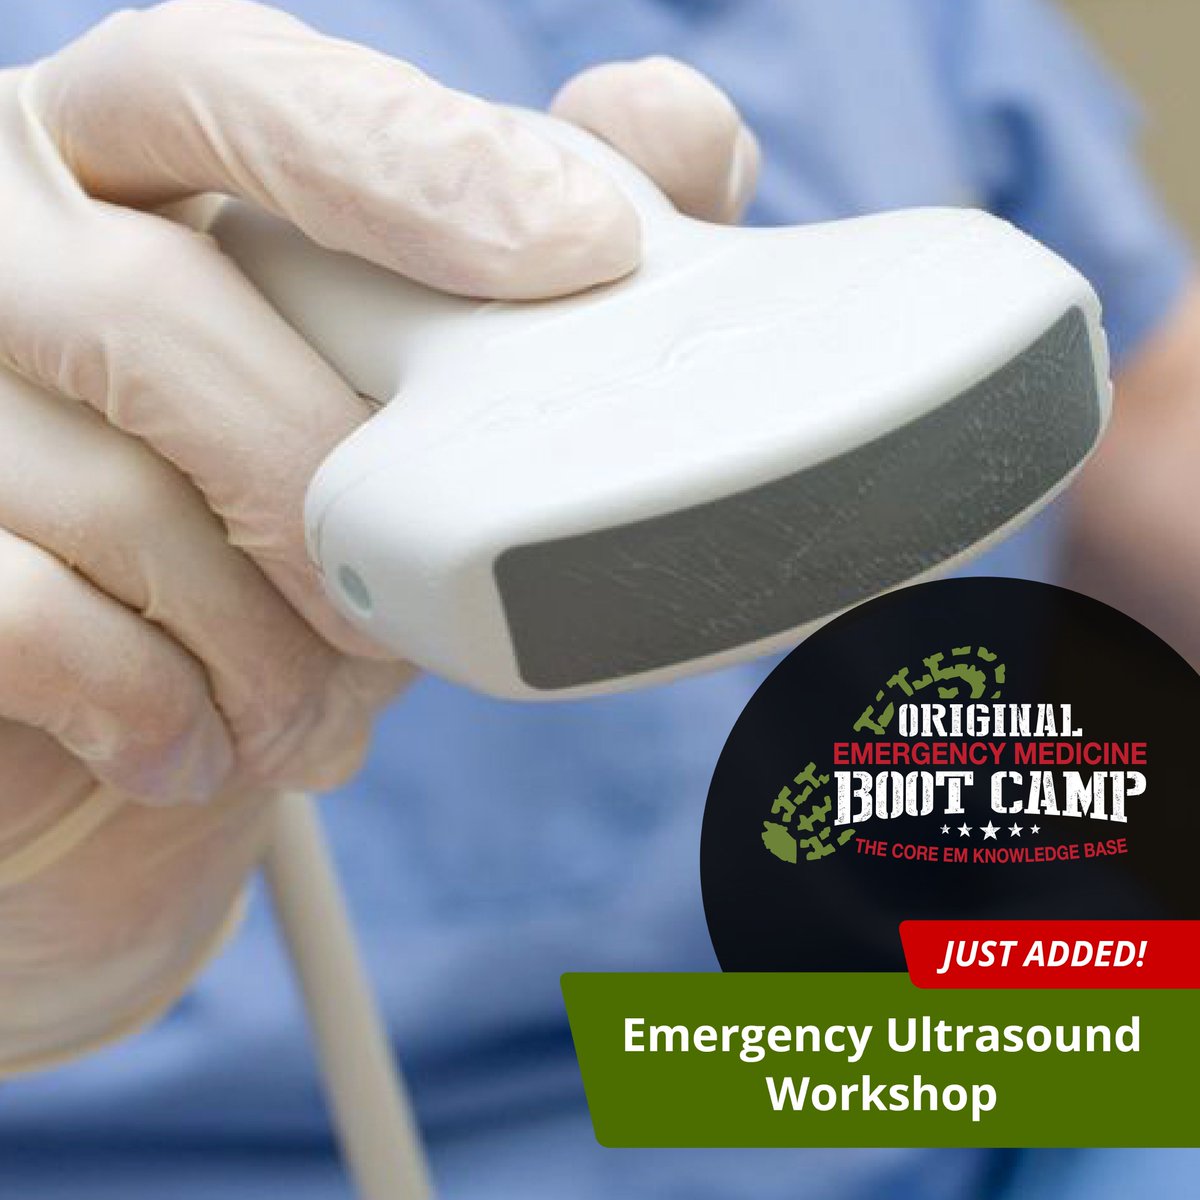 Spots are filling up quickly for the EM Boot Camp Hands-On Emergency Ultrasound Workshop! ⏱ Learn more and register at courses.ccme.org/course/embootc…. Only 40 registrants per class - December 2nd or 3rd, 2019 at Planet Hollywood in Las Vegas.